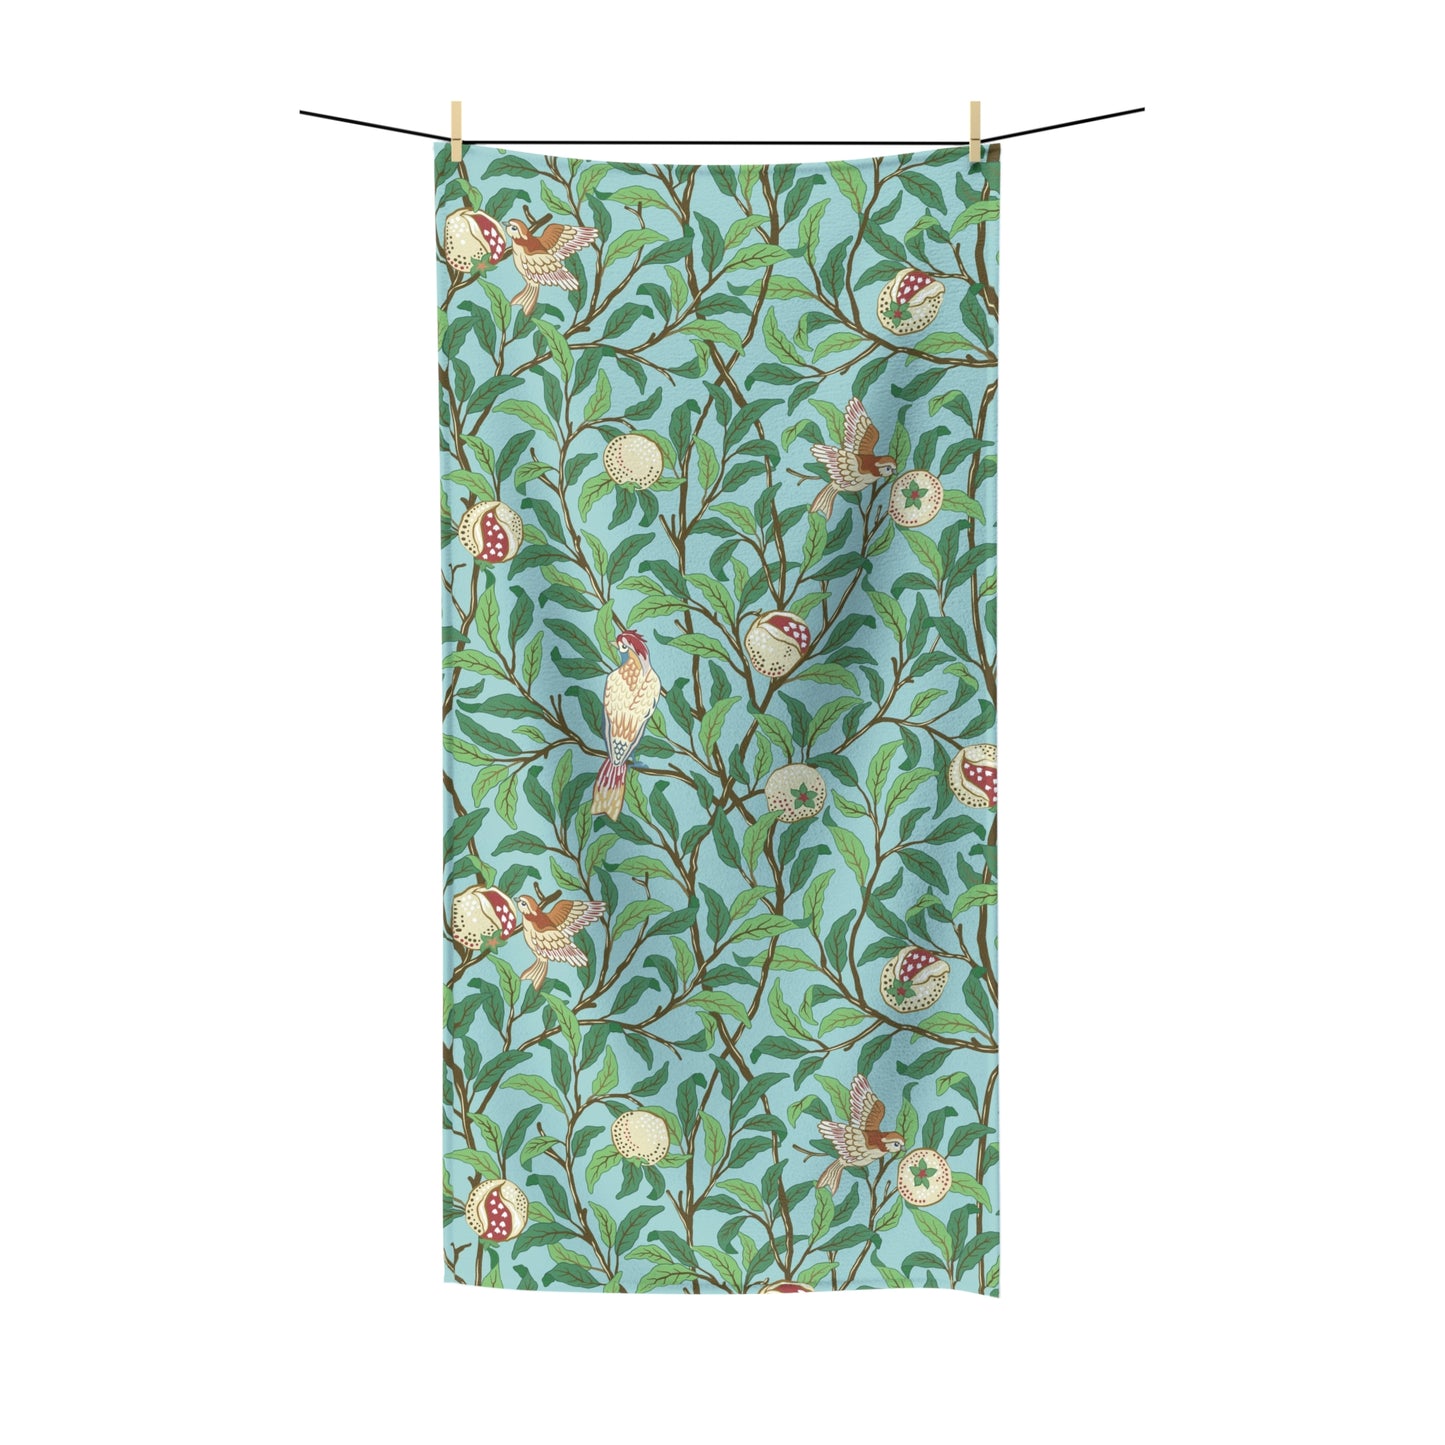 William Morris & Co Luxury Polycotton Towel - Bird and Pomegranate Collection (Tiffany Blue)